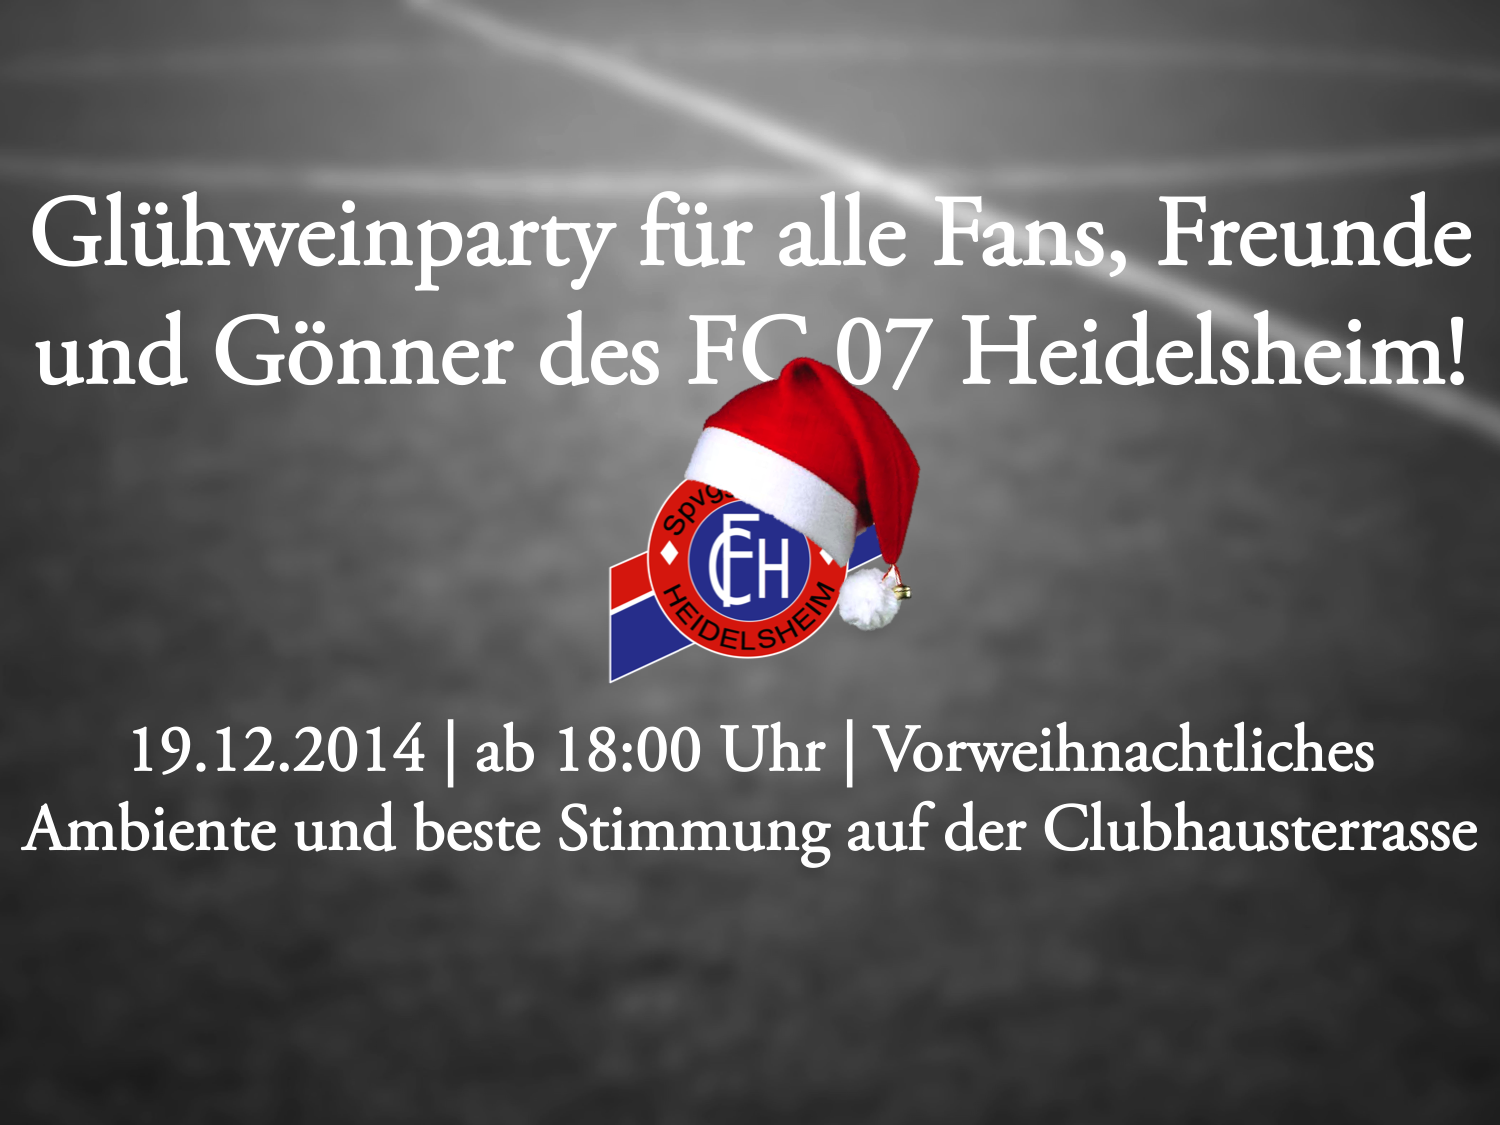 You are currently viewing fc 07 heidelsheim | glühweinparty